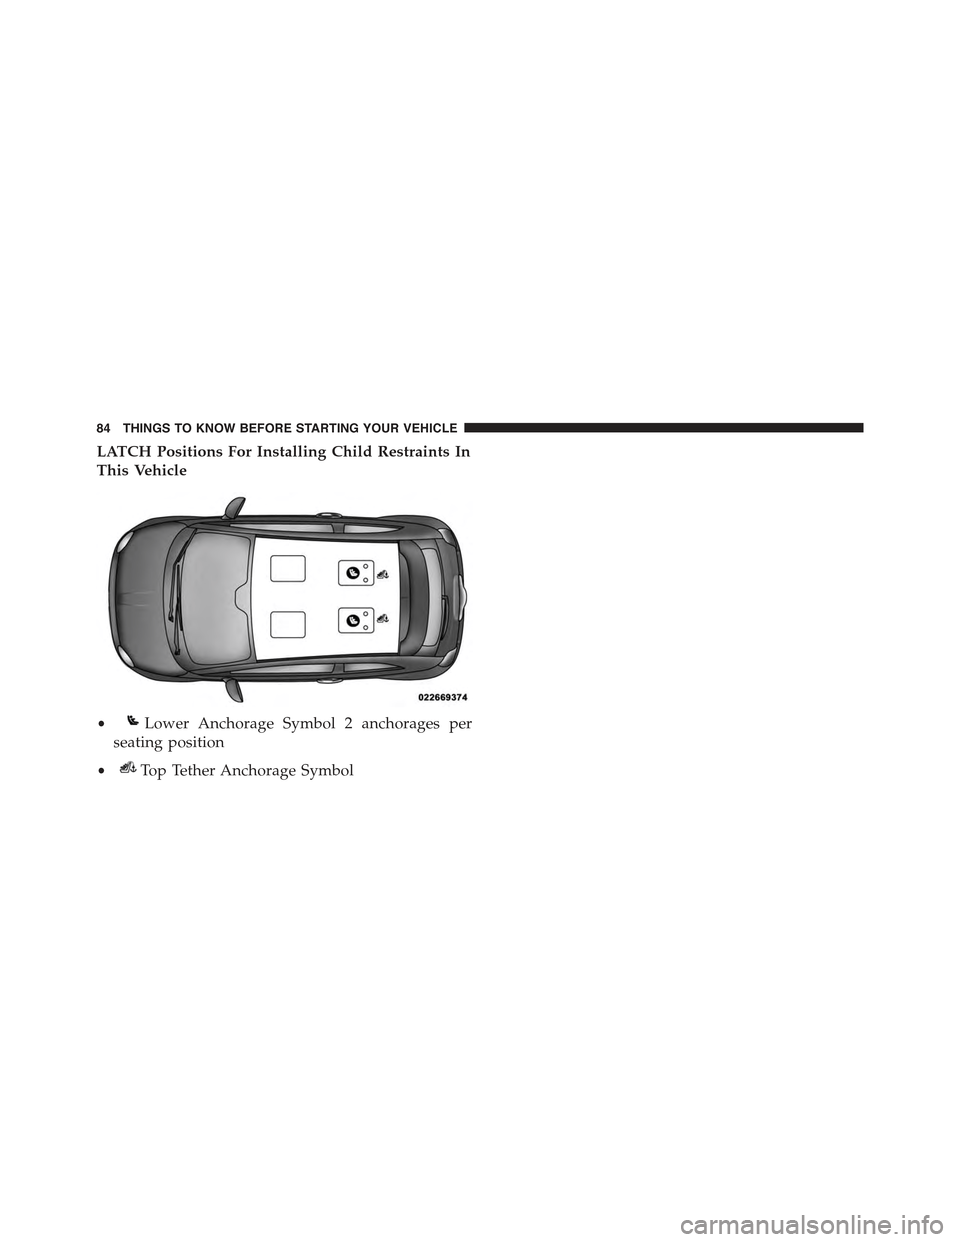 FIAT 500E 2015 2.G User Guide LATCH Positions For Installing Child Restraints In
This Vehicle
•Lower Anchorage Symbol 2 anchorages per
seating position
•Top Tether Anchorage Symbol
84 THINGS TO KNOW BEFORE STARTING YOUR VEHICL